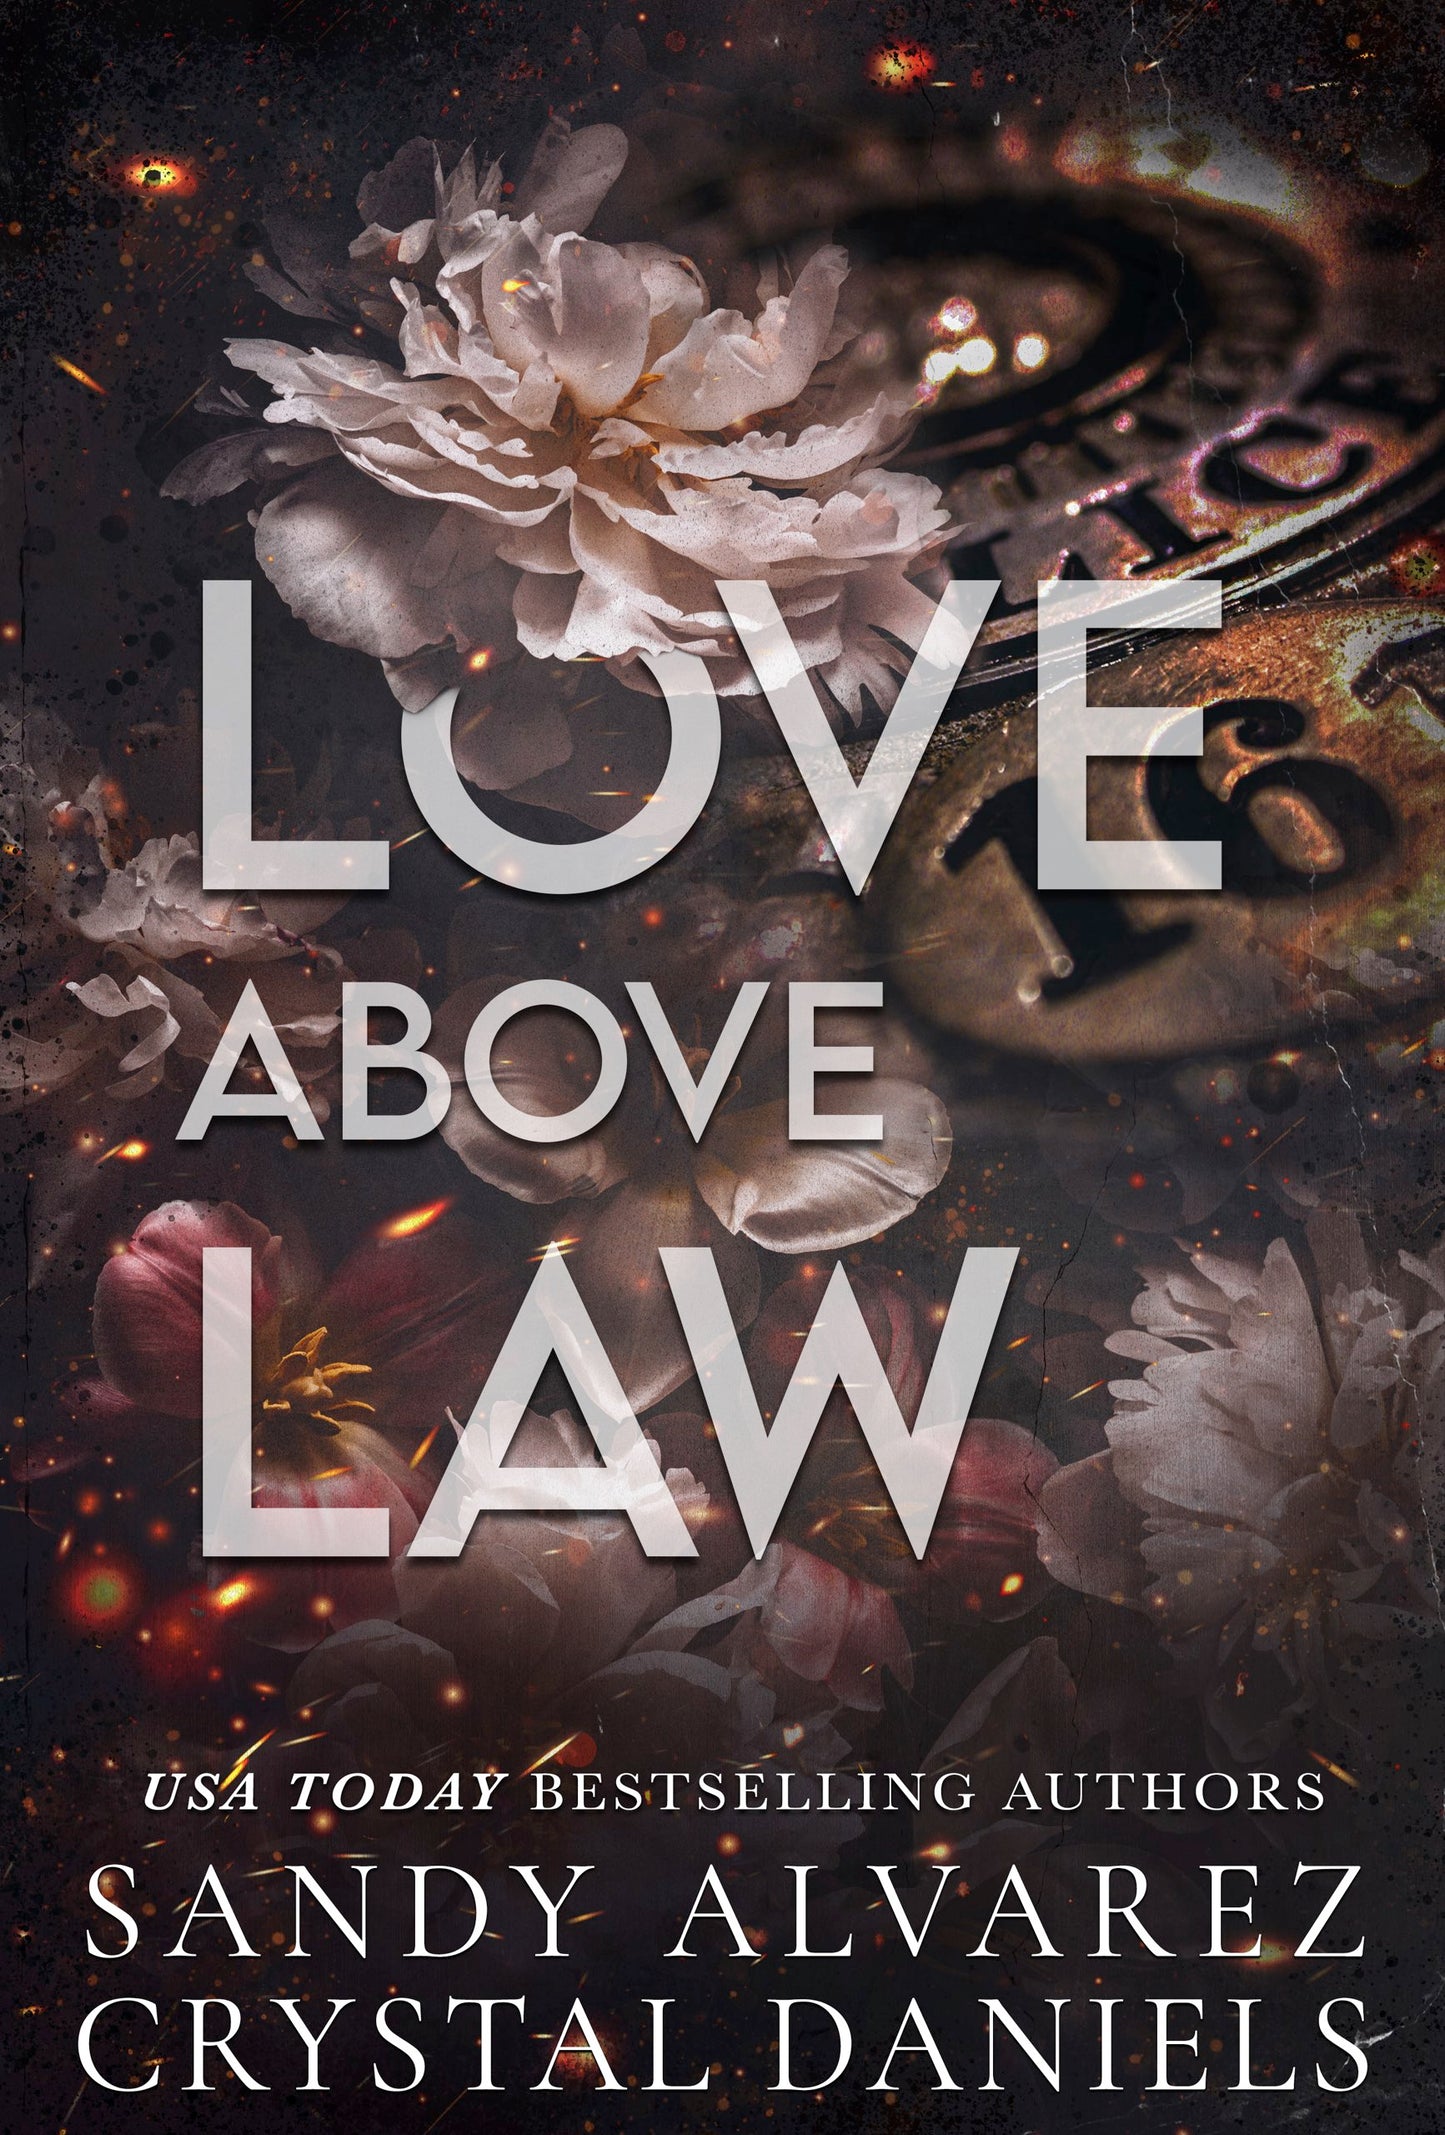 Love Above Law